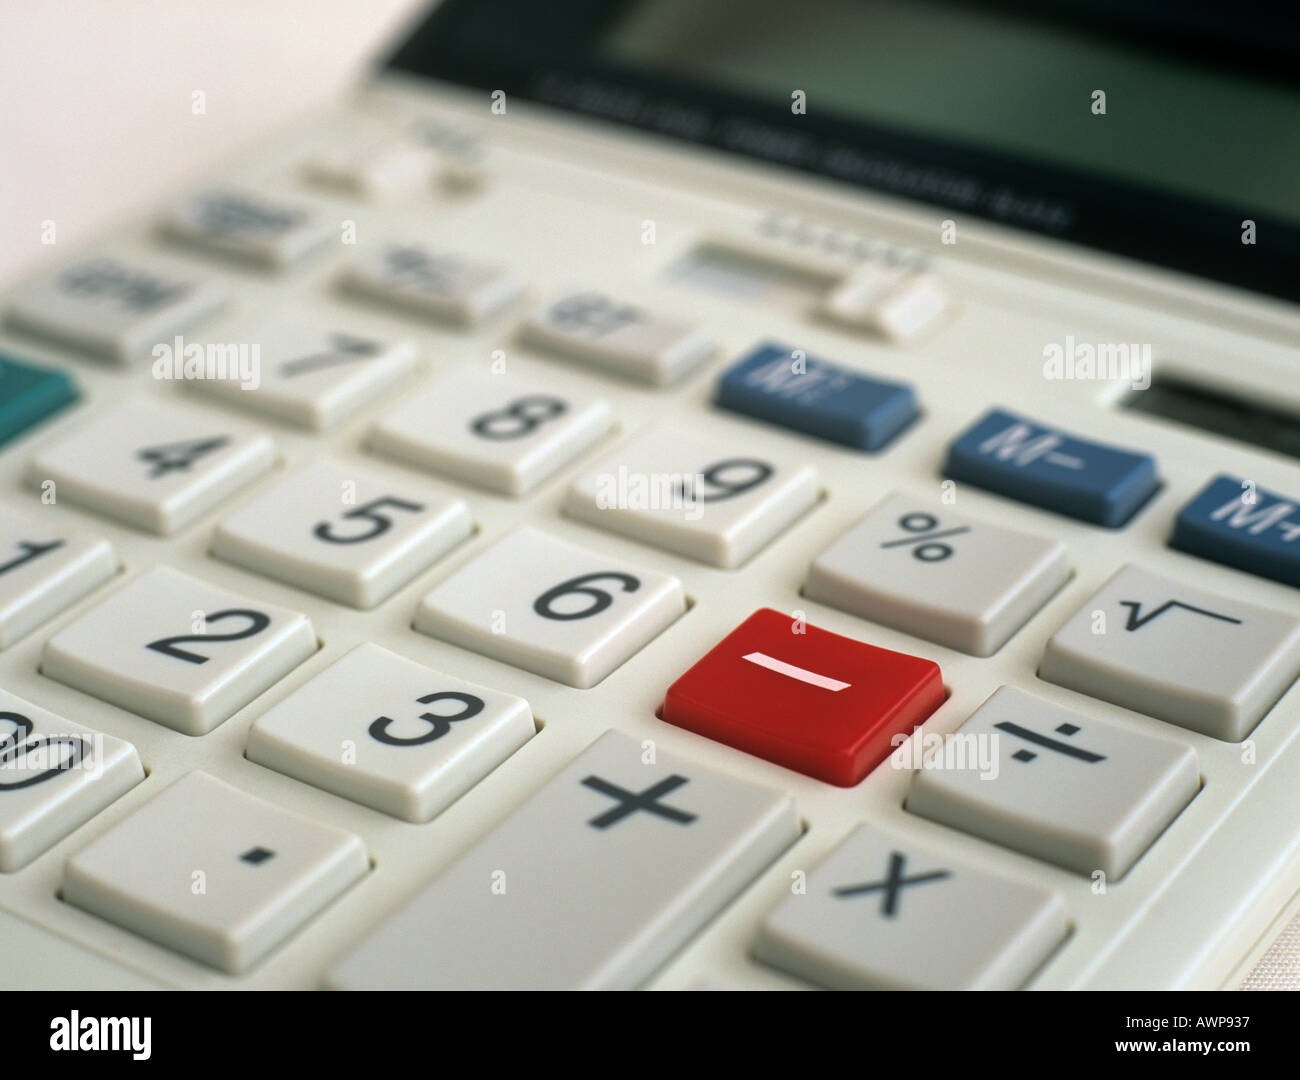 Calculator in close up focused on red minus key Stock Photo